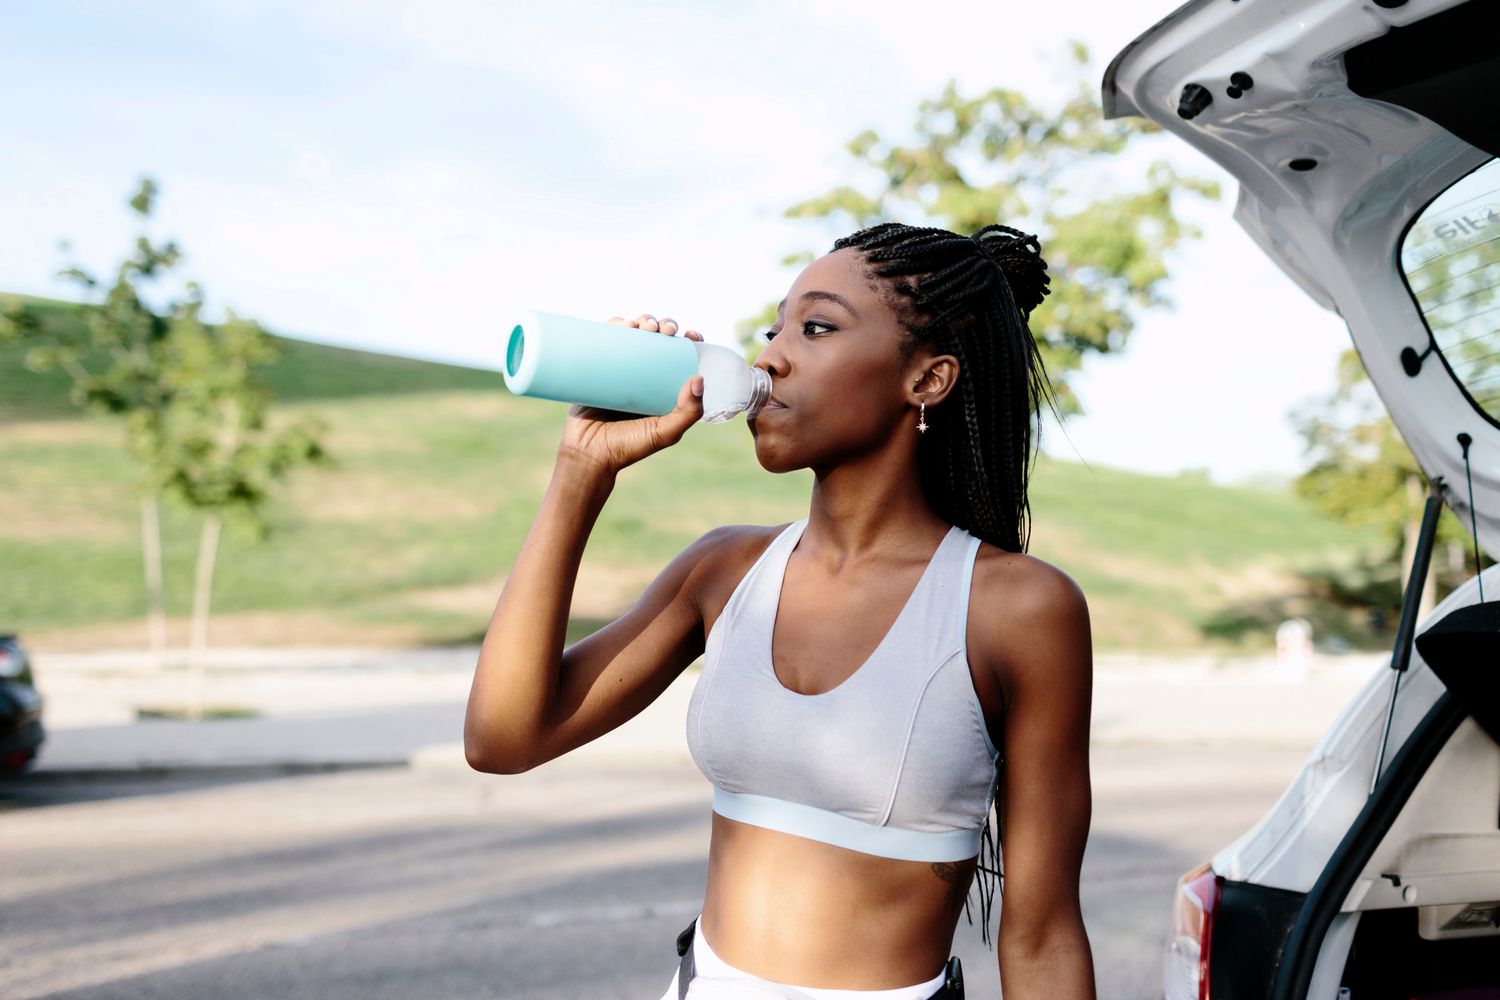 Attractive young black woman on sportswear and with braided hairstyle drinks water next to a car before she starts her training. She's outdoors next to a park in the daytime in a summer morning.